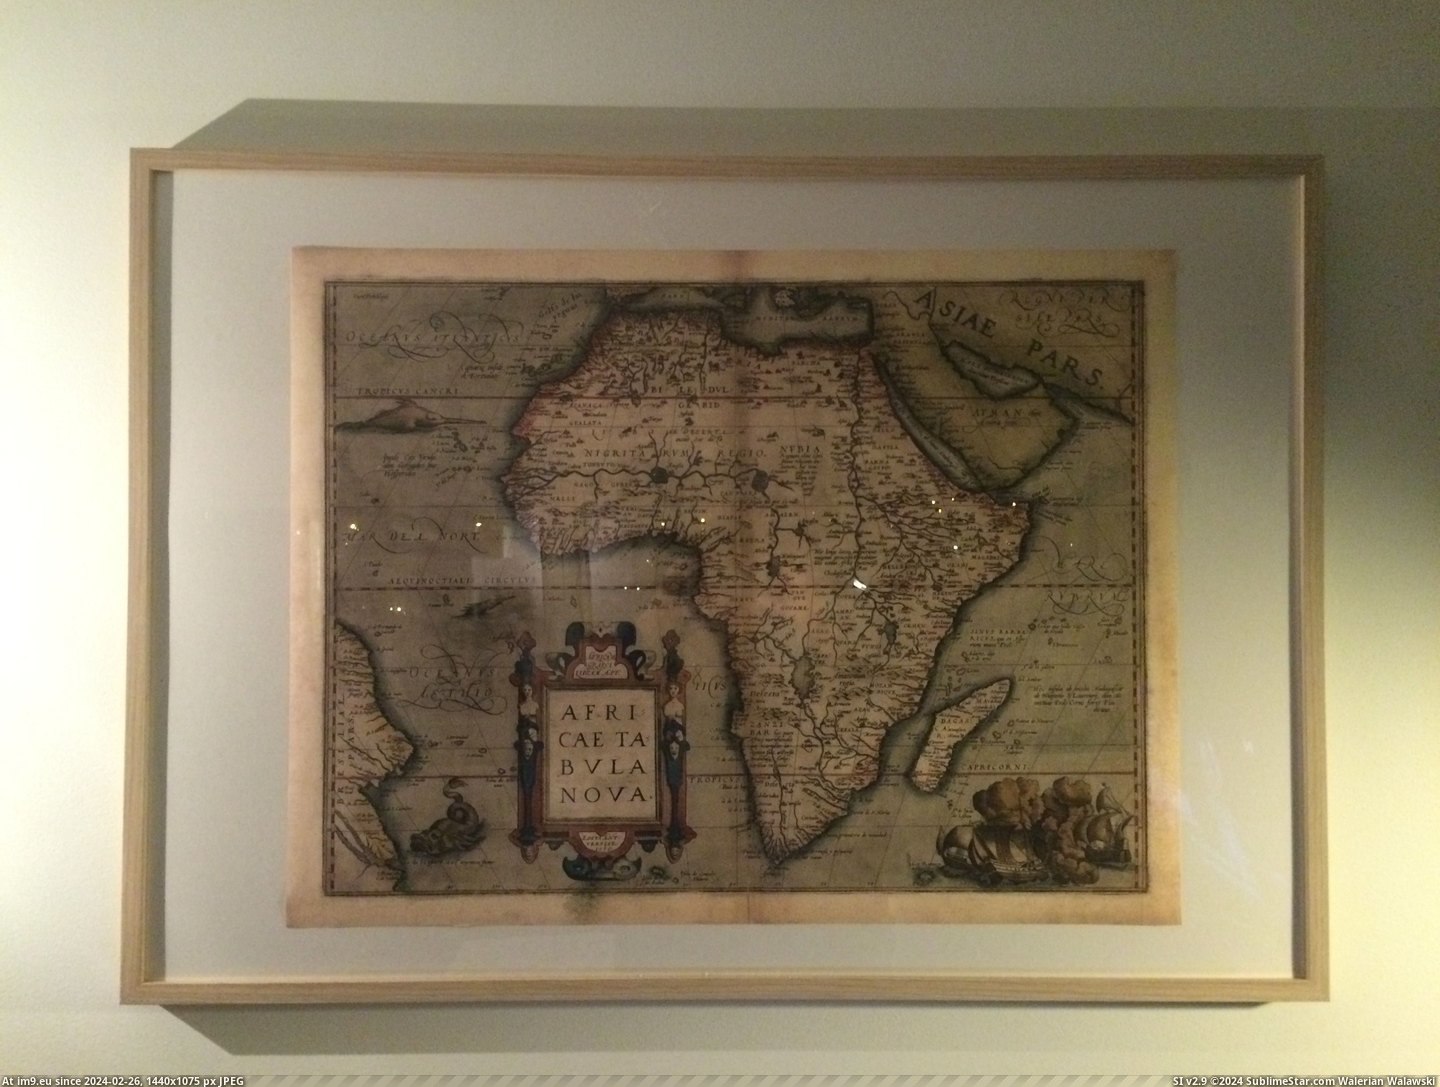 #White #Great #Map #Africa #Received #Replica #Spice #Way #Giant #Wall [Mapporn] Just received a replica of a 1570 map of Africa! Great way to spice up a giant white wall [3264 x 2448] Pic. (Bild von album My r/MAPS favs))